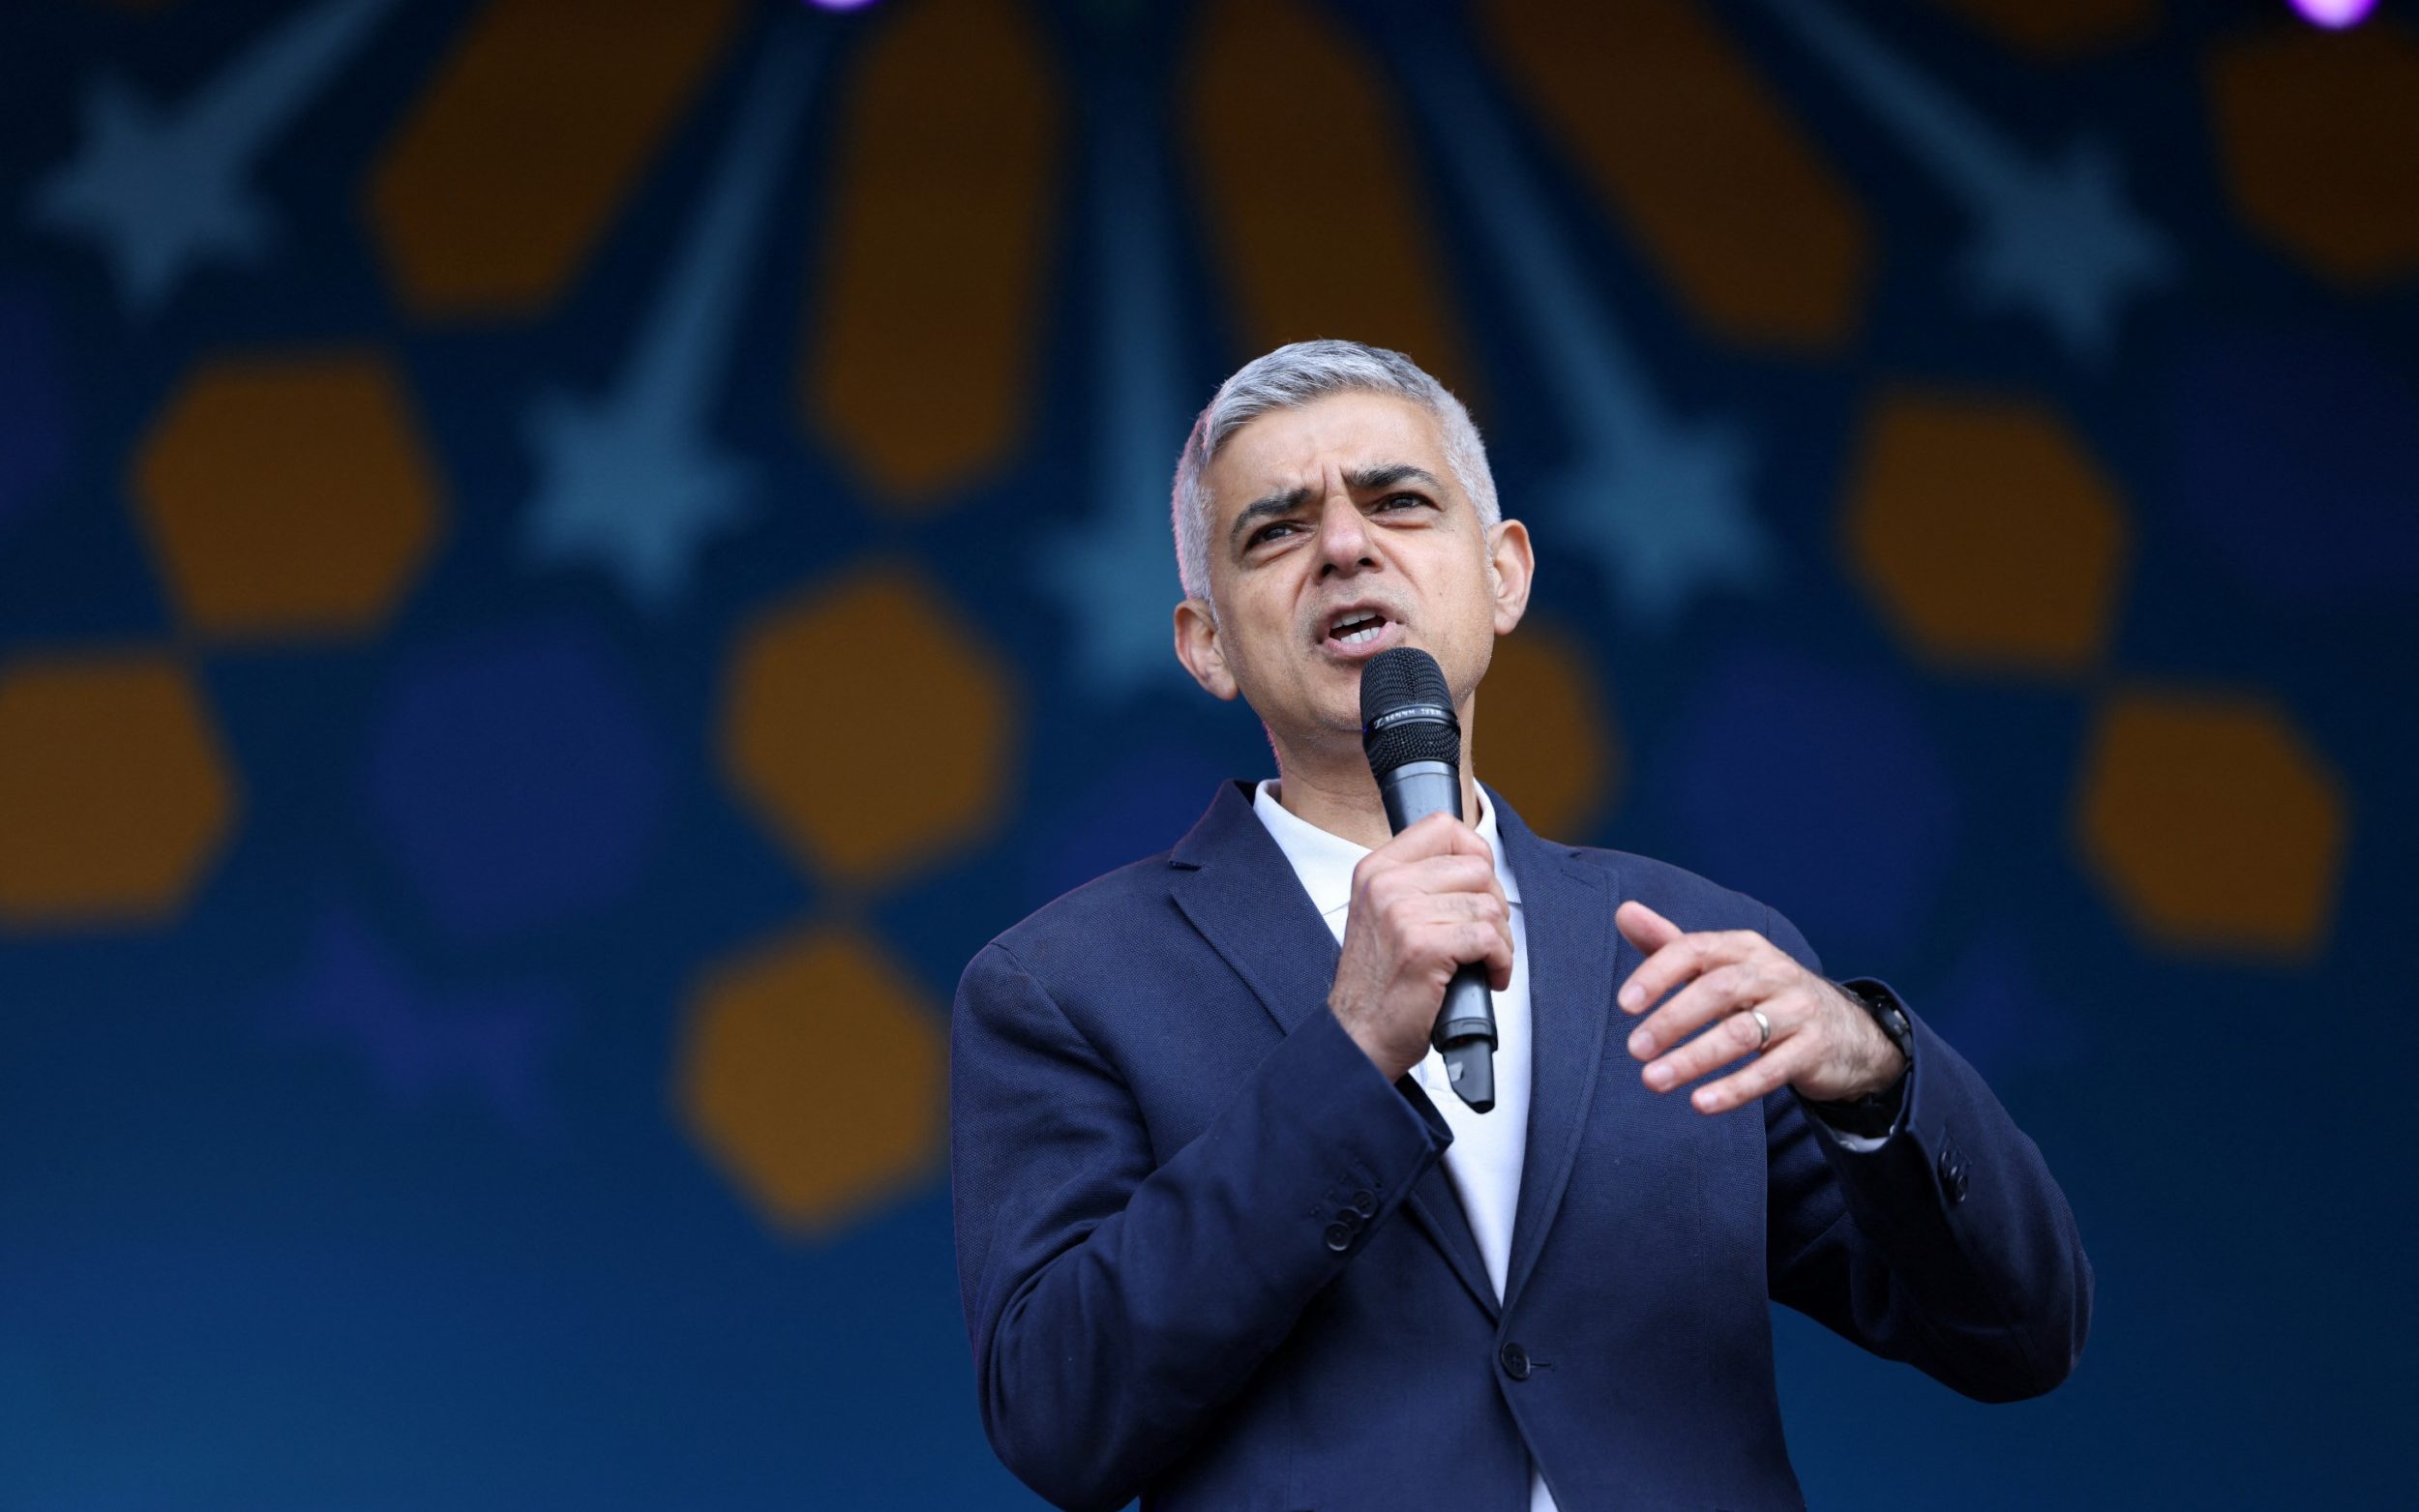 sadiq khan says elgin marbles should be ‘shared’ with greece